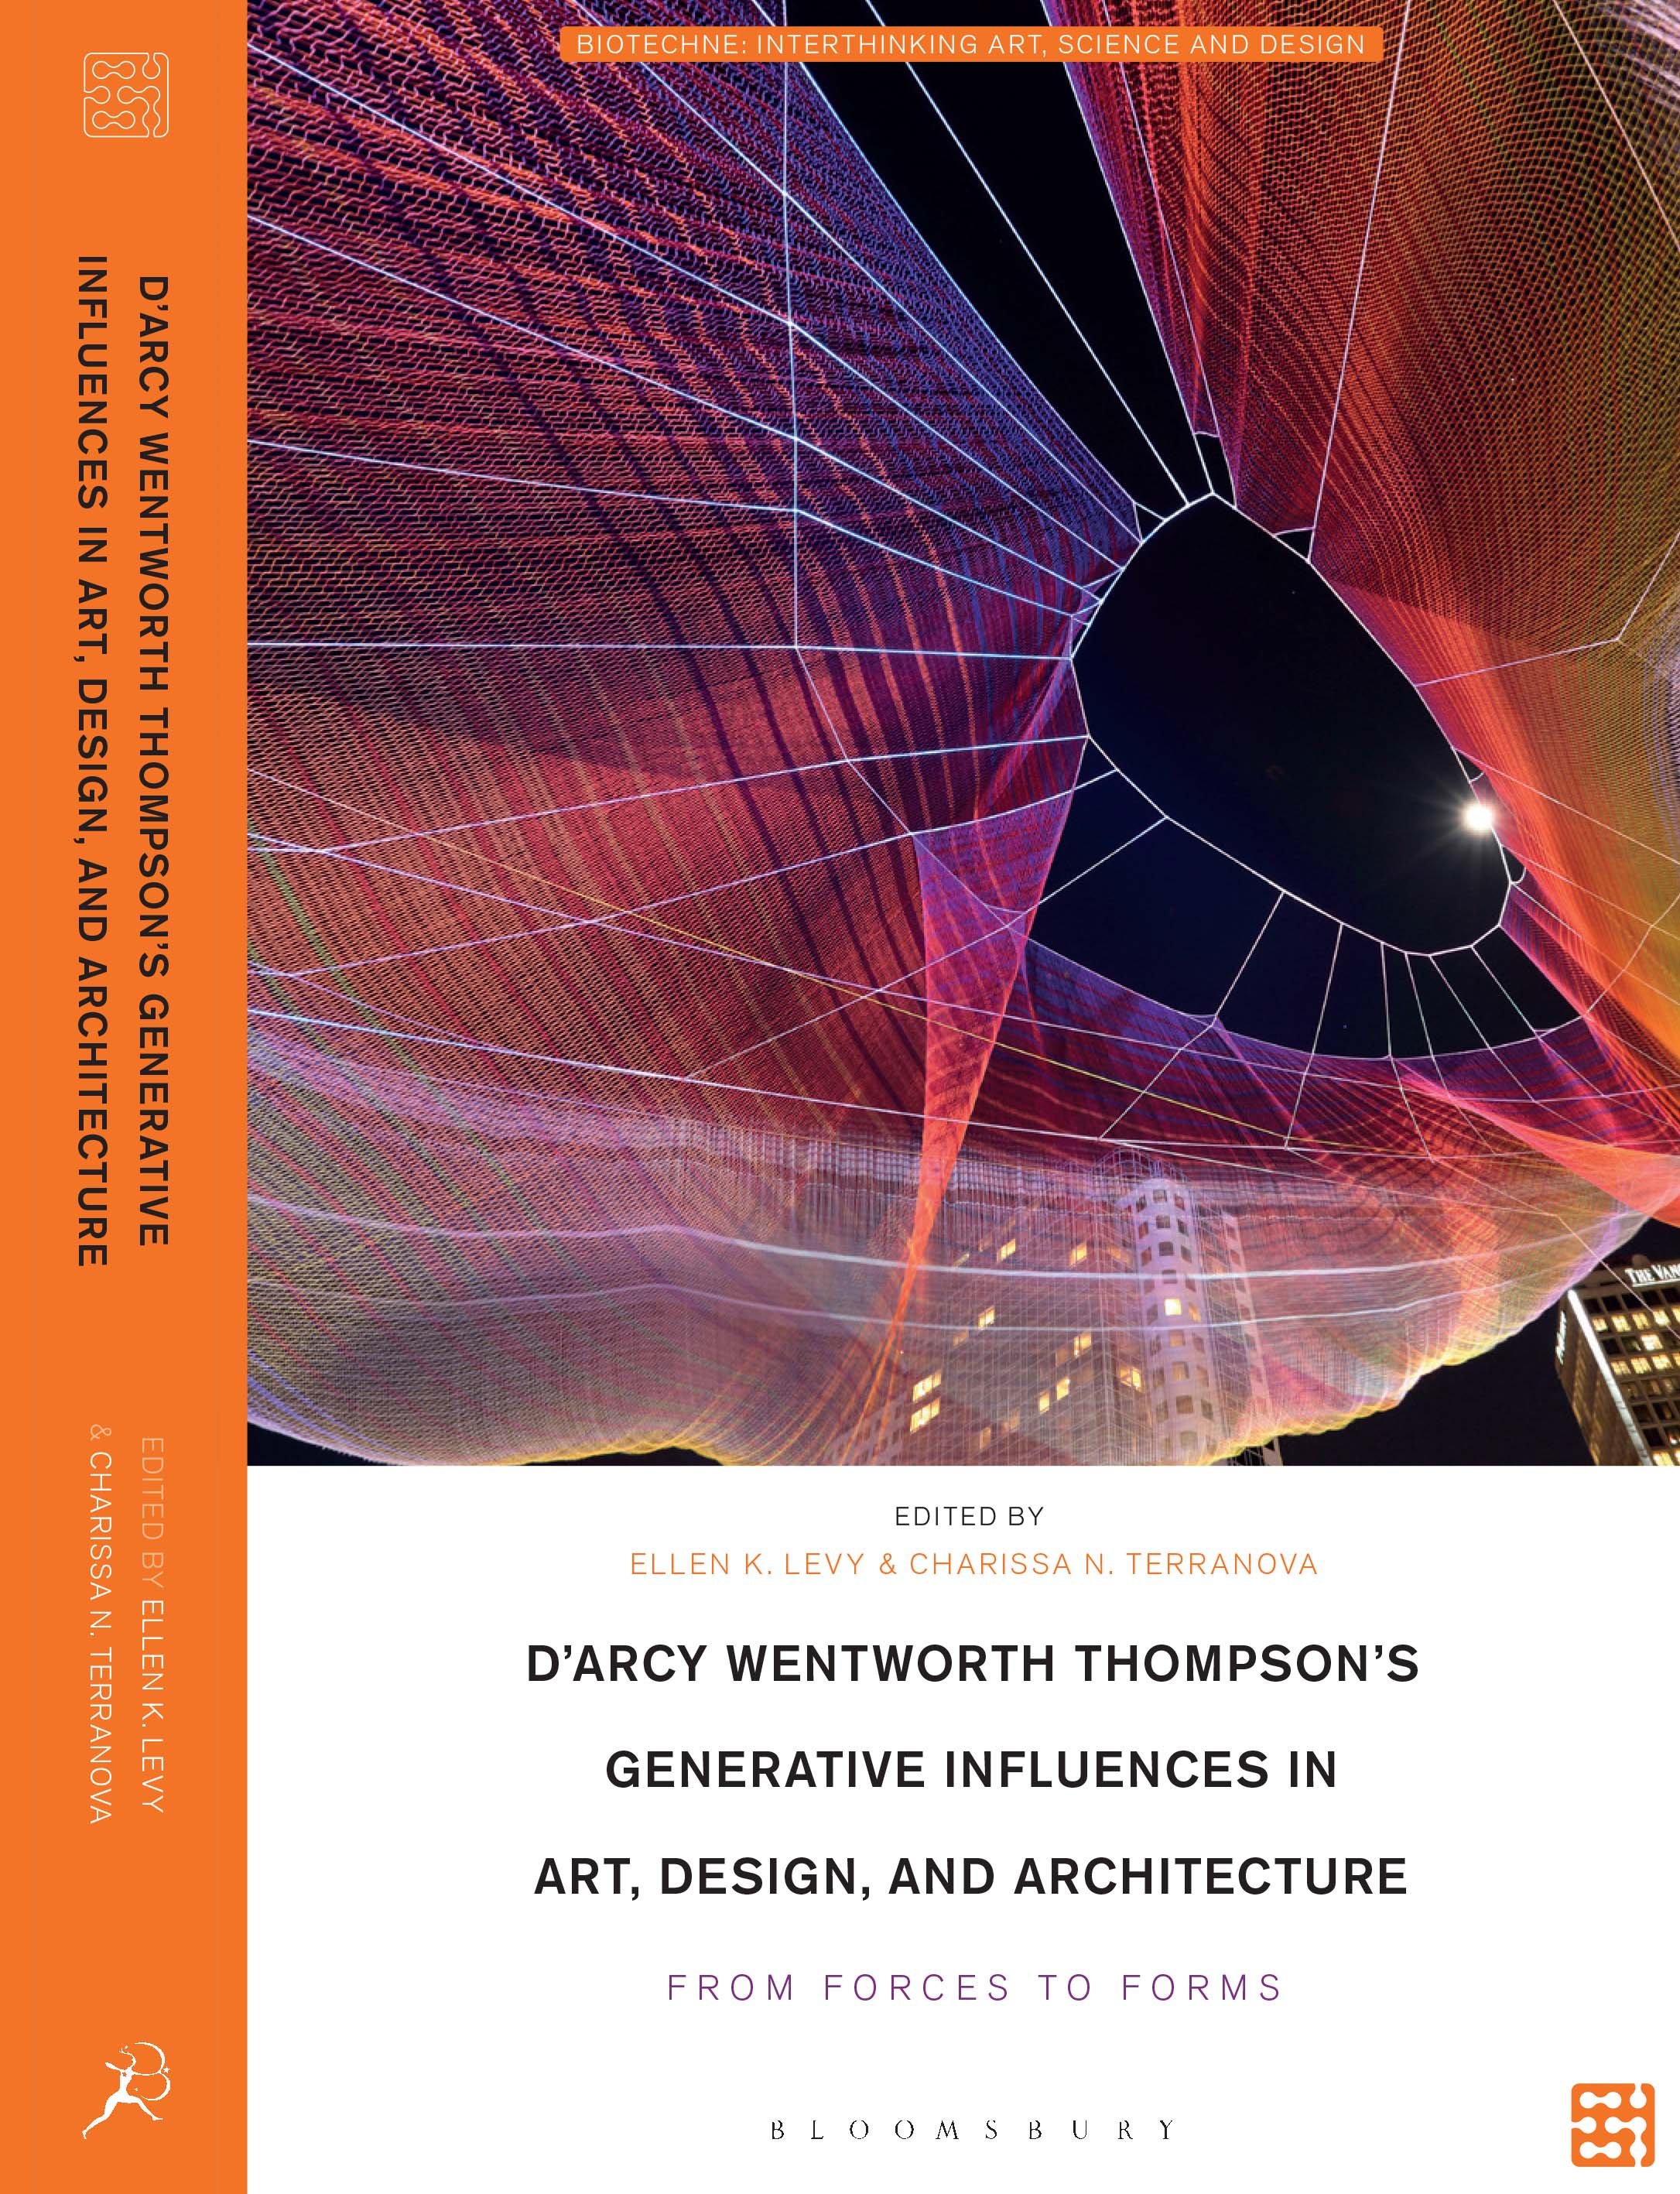 D’ARCY WENTWORTH THOMPSON’S GENERATIVE INFLUENCES IN ART, DESIGN, AND ARCHITECTURE